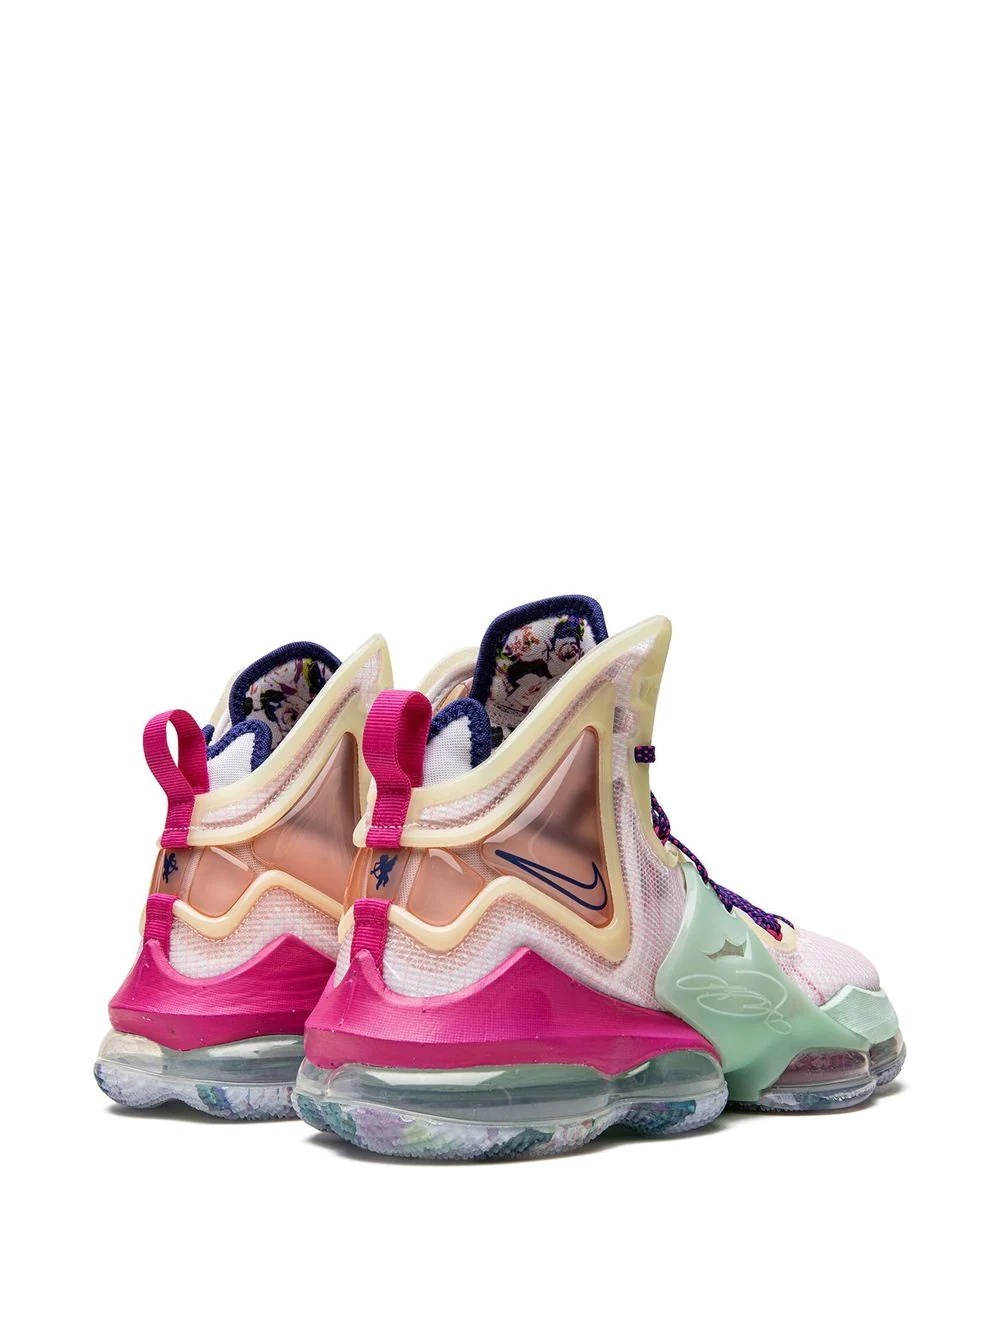 LeBron 19 "Valentine's Day" sneakers - 3